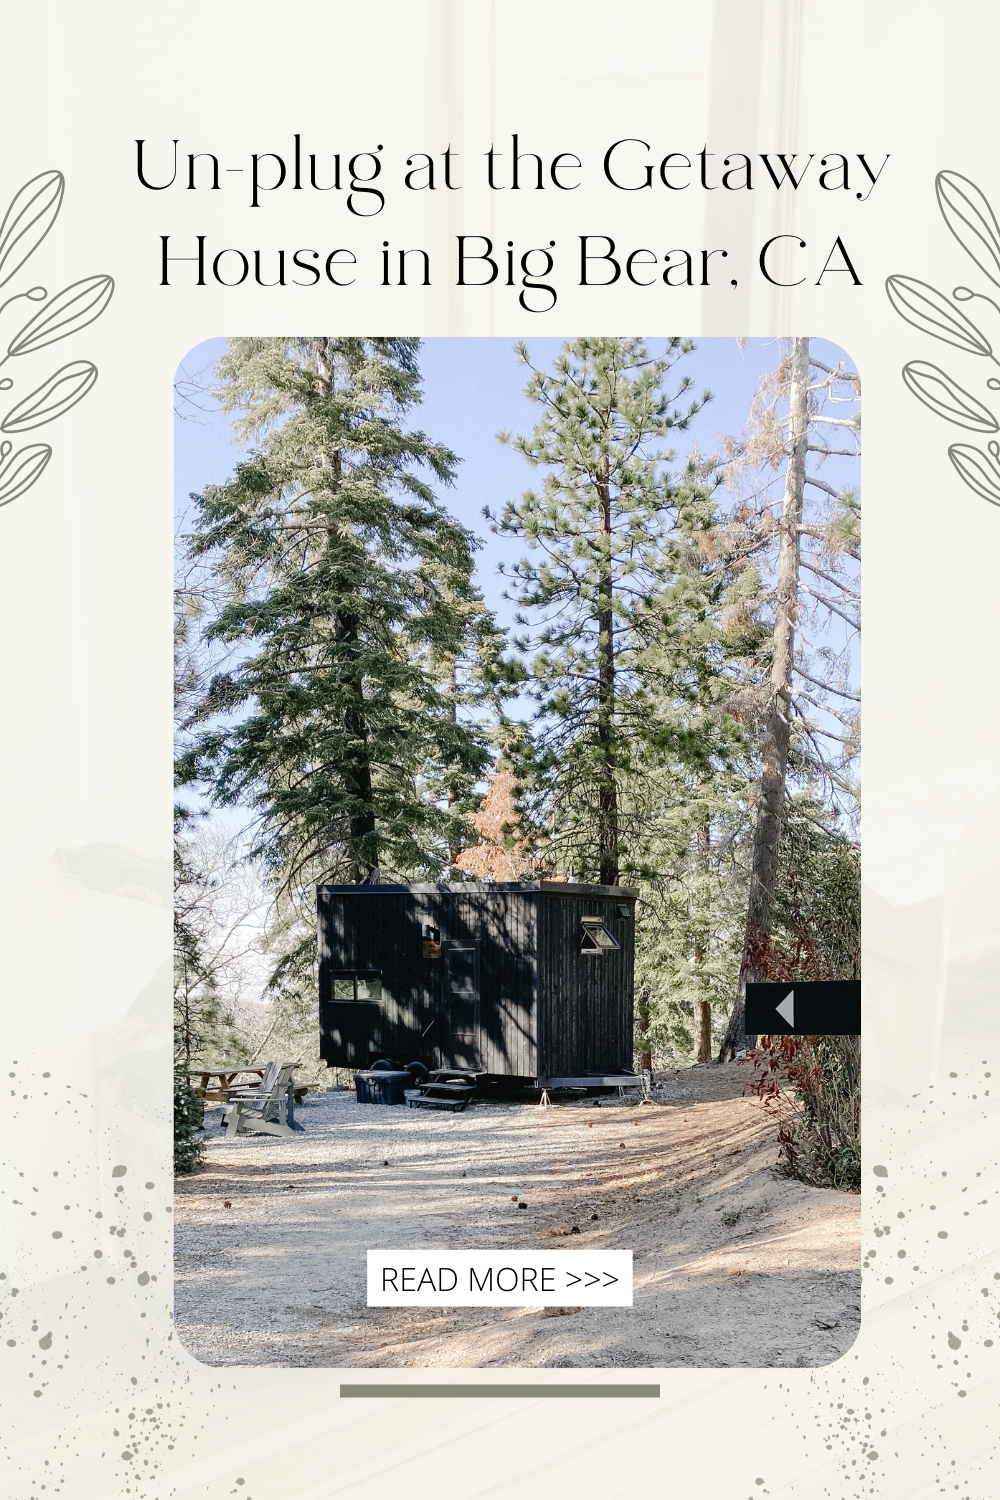 where to stay in Big Bear, where to stay in lake arrowhead, where to camp in big bear, big bear getaway house, getaway house in california